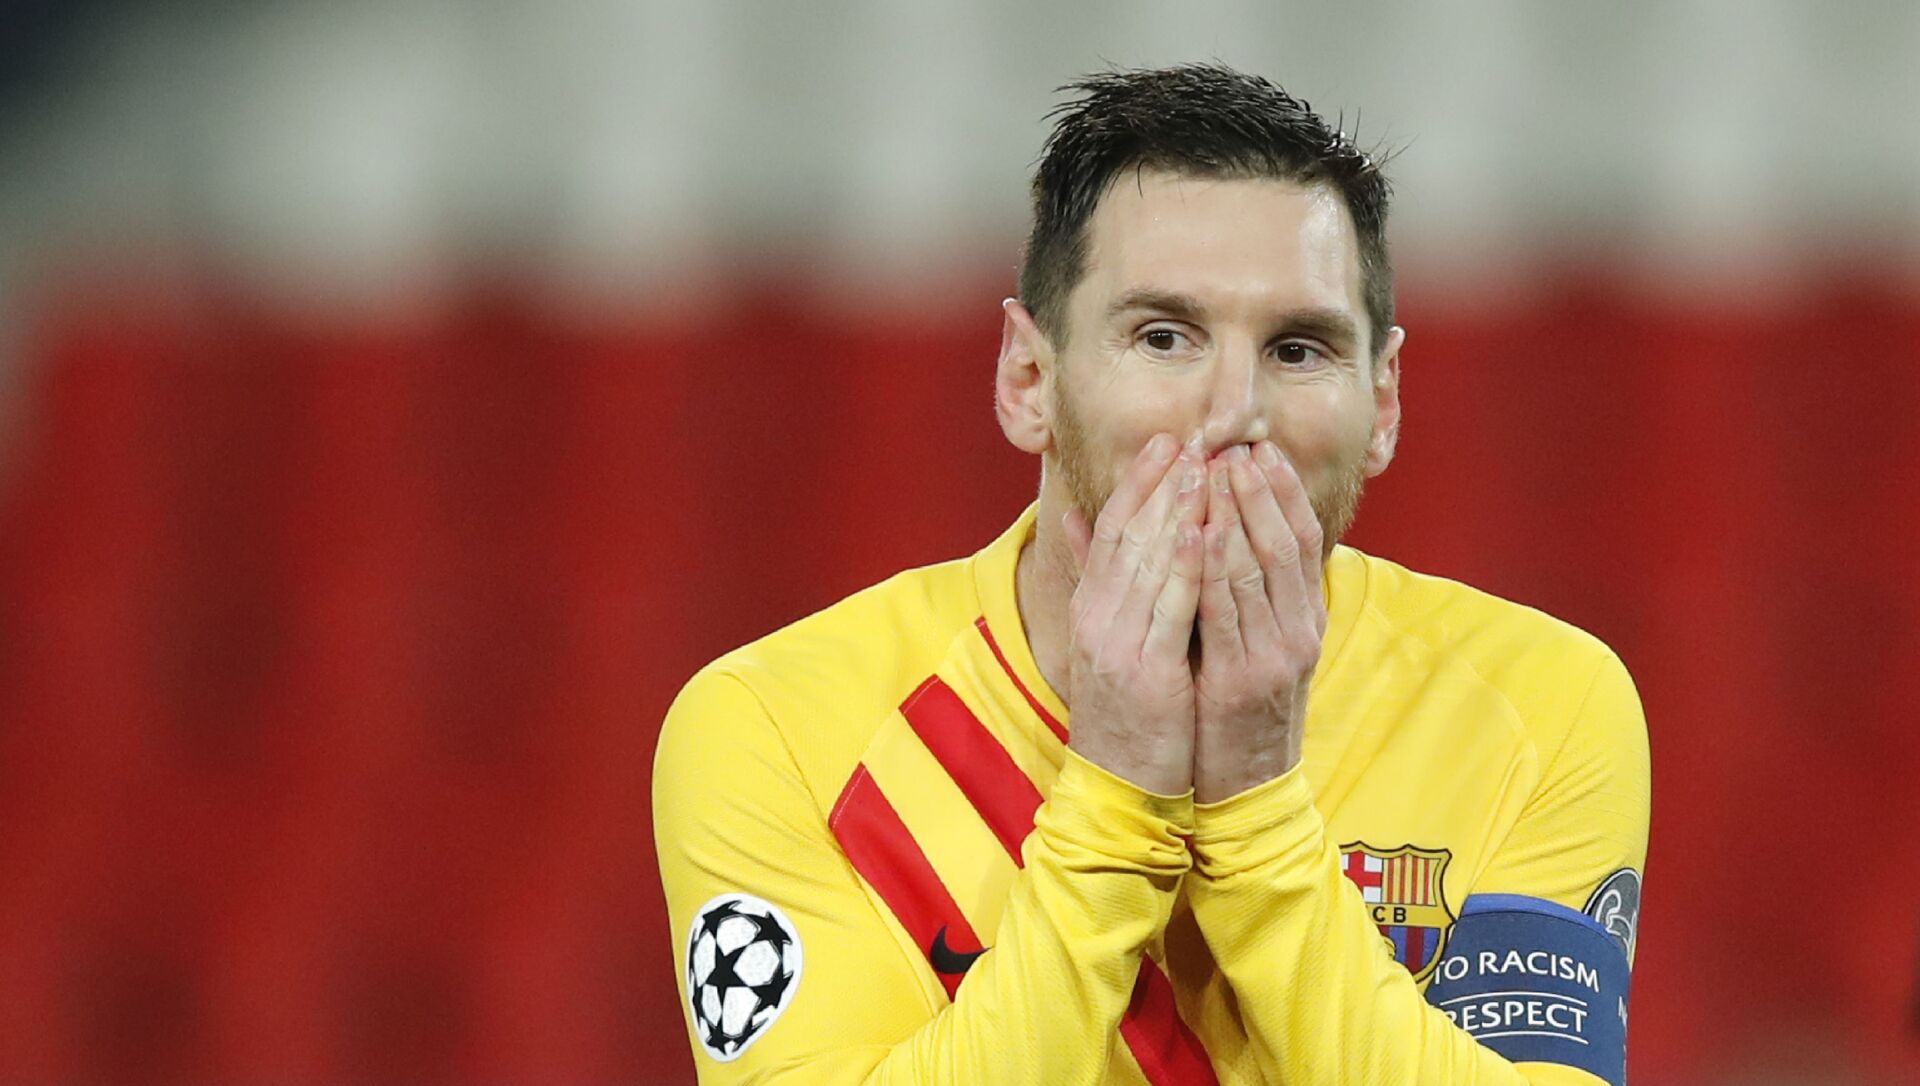 Barcelona's Lionel Messi reacts after a missed a penalty shot during the Champions League, round of 16, second leg soccer match between Paris Saint-Germain and FC Barcelona at the Parc des Princes stadium in Paris on Wednesday, March 10, 2021 - اسپوتنیک افغانستان  , 1920, 01.07.2021